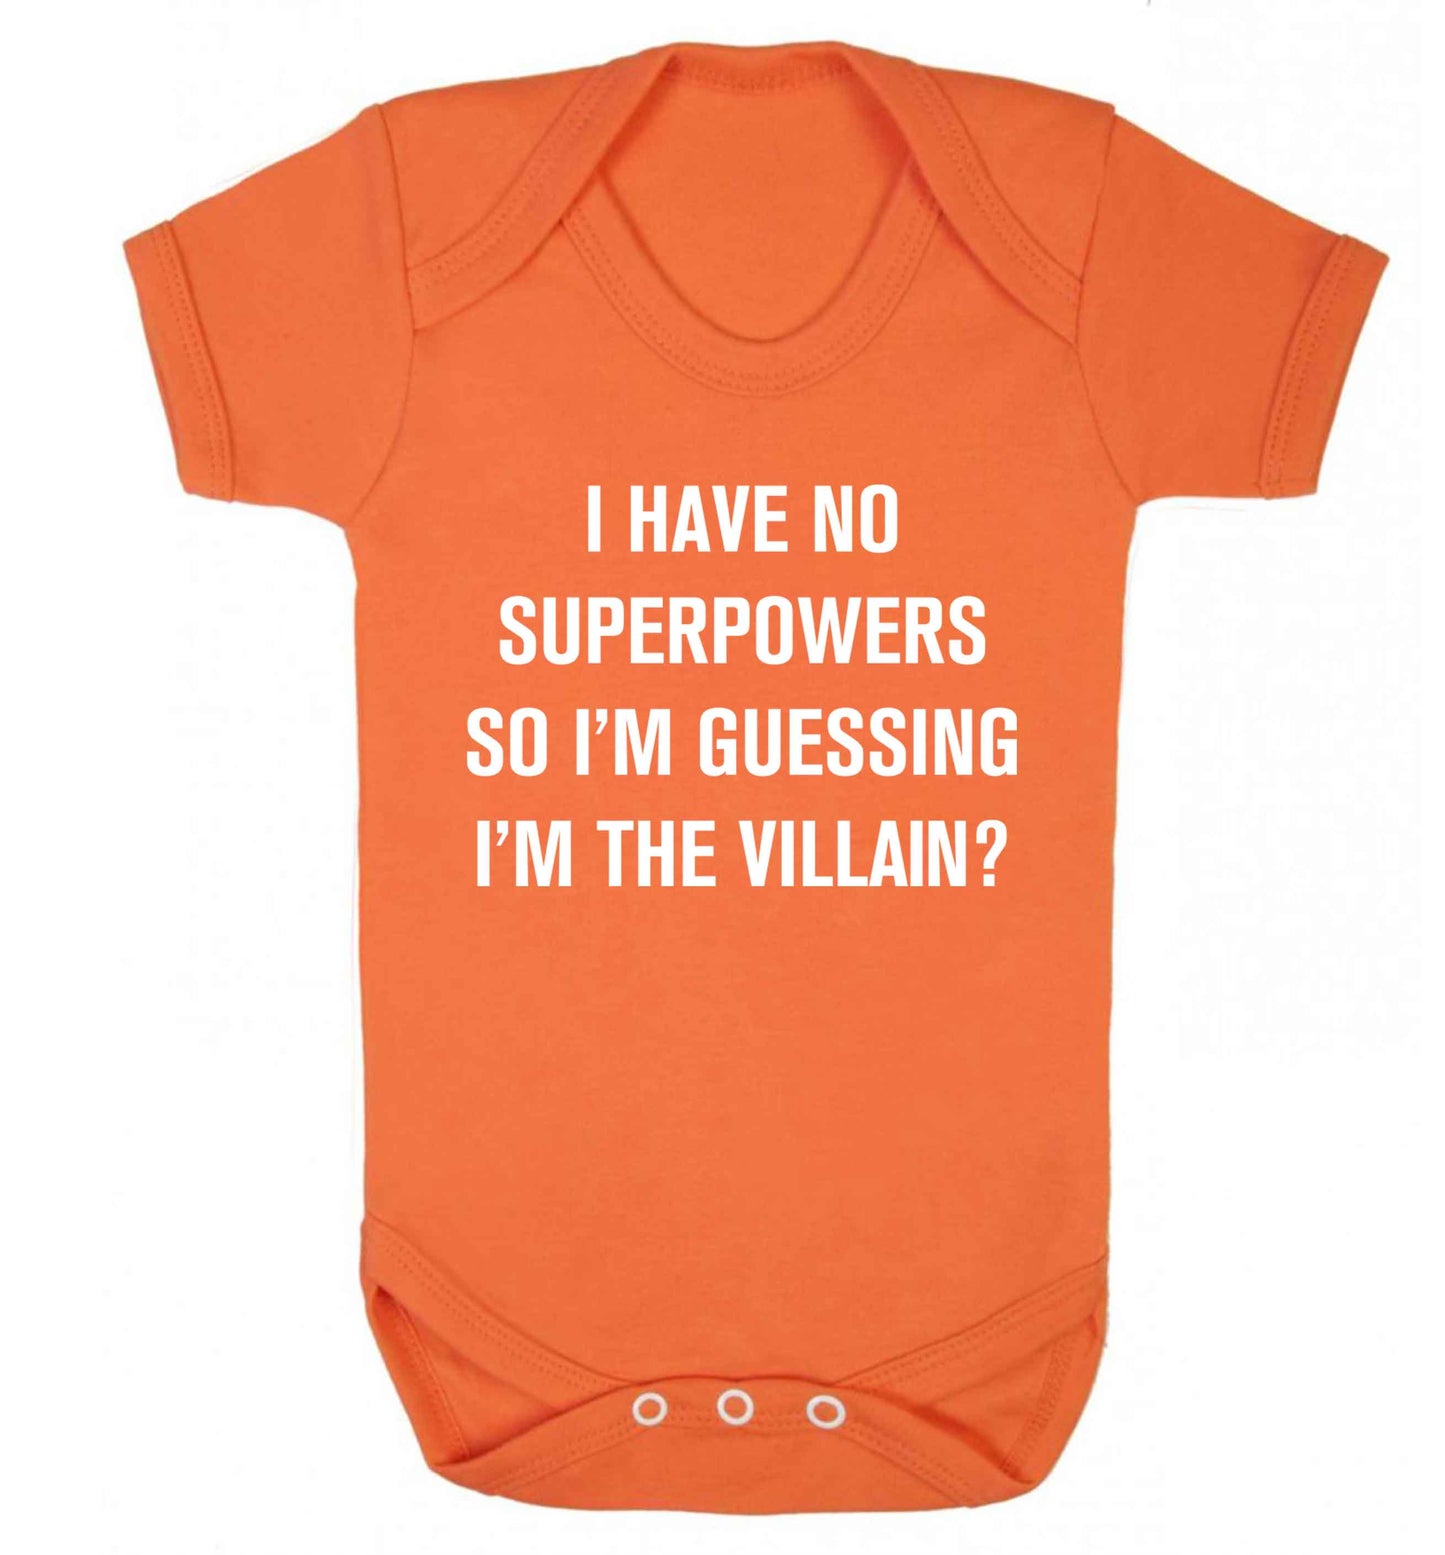 I have no superpowers so I'm guessing I'm the villain? Baby Vest orange 18-24 months